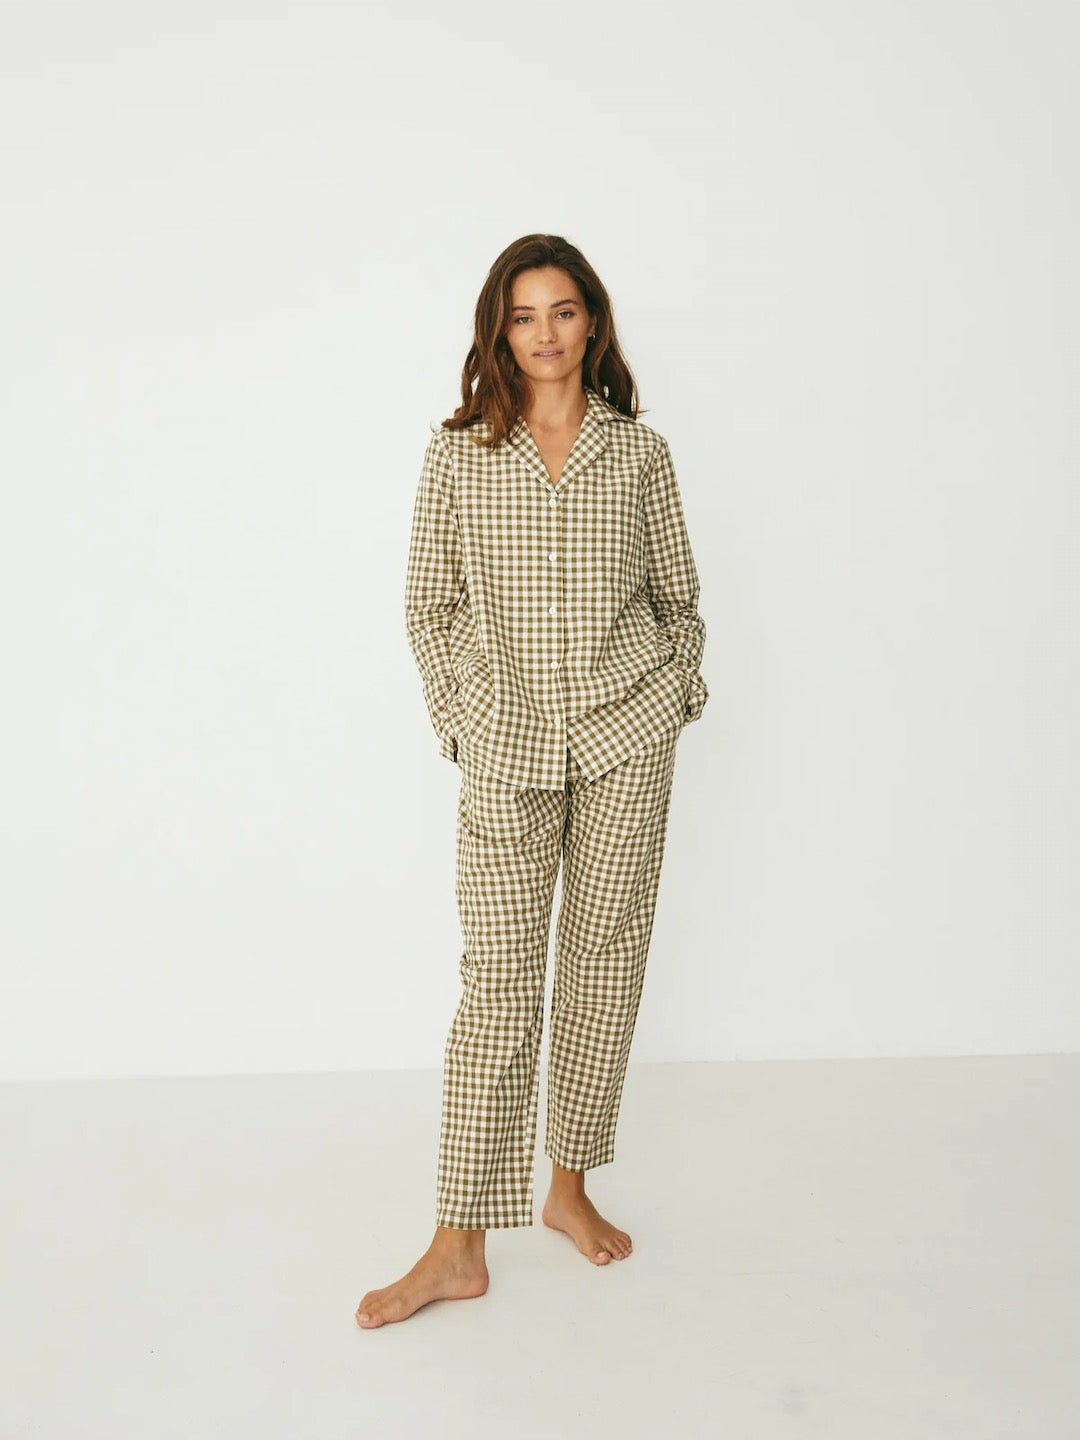 The model is wearing a Classic Set – Olive Gingham pajama set from general sleep.